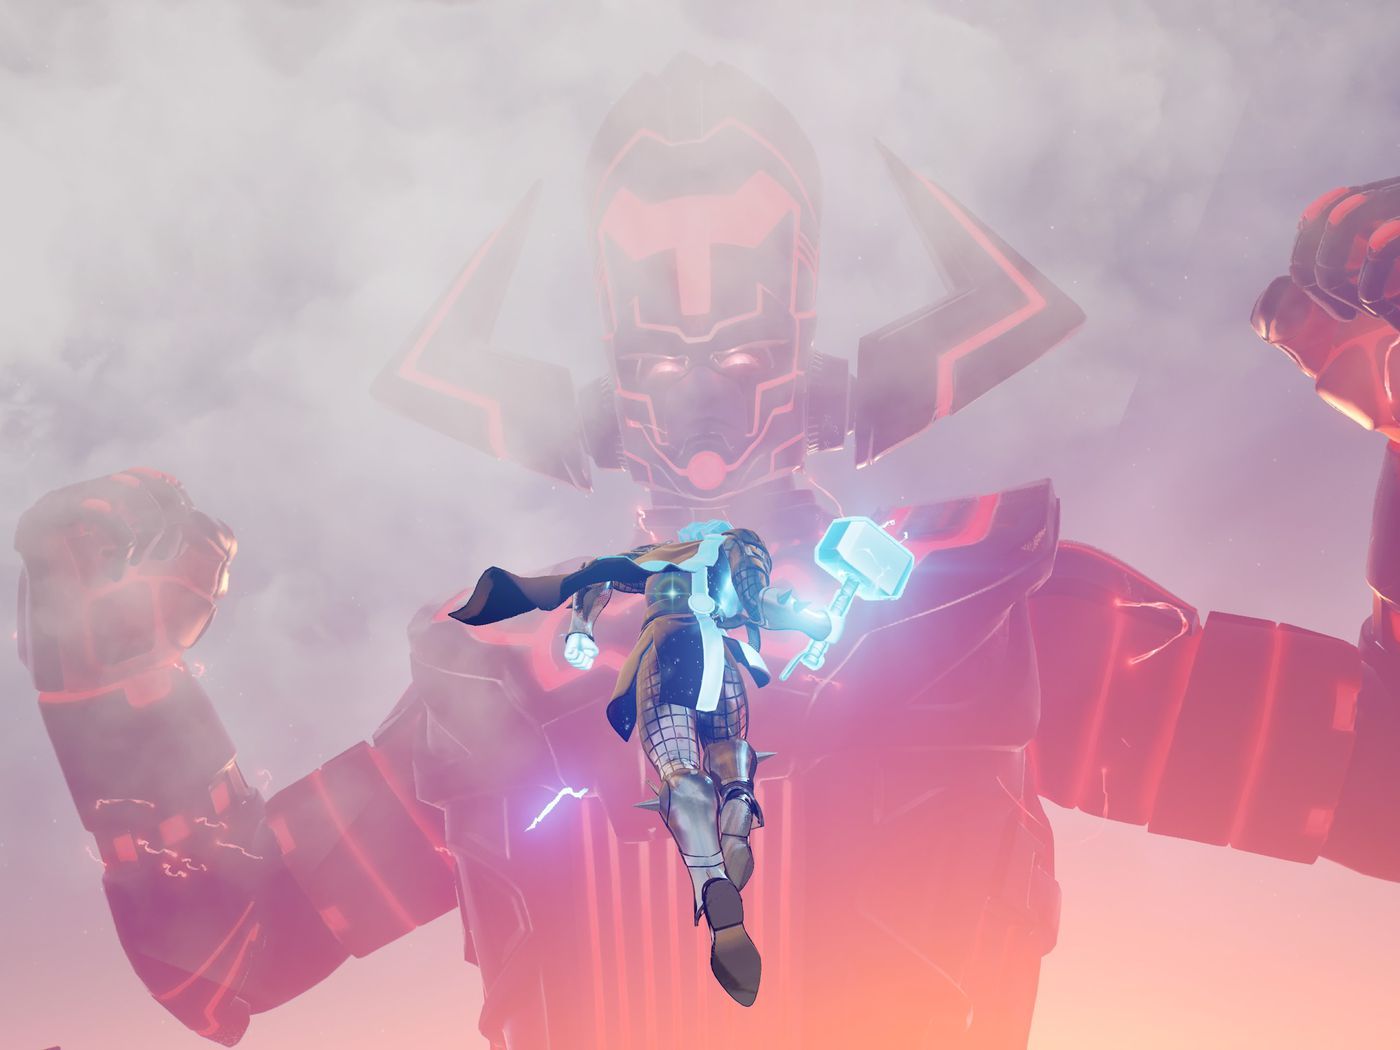 Fortnite's Galactus event was a giant arcade shooter